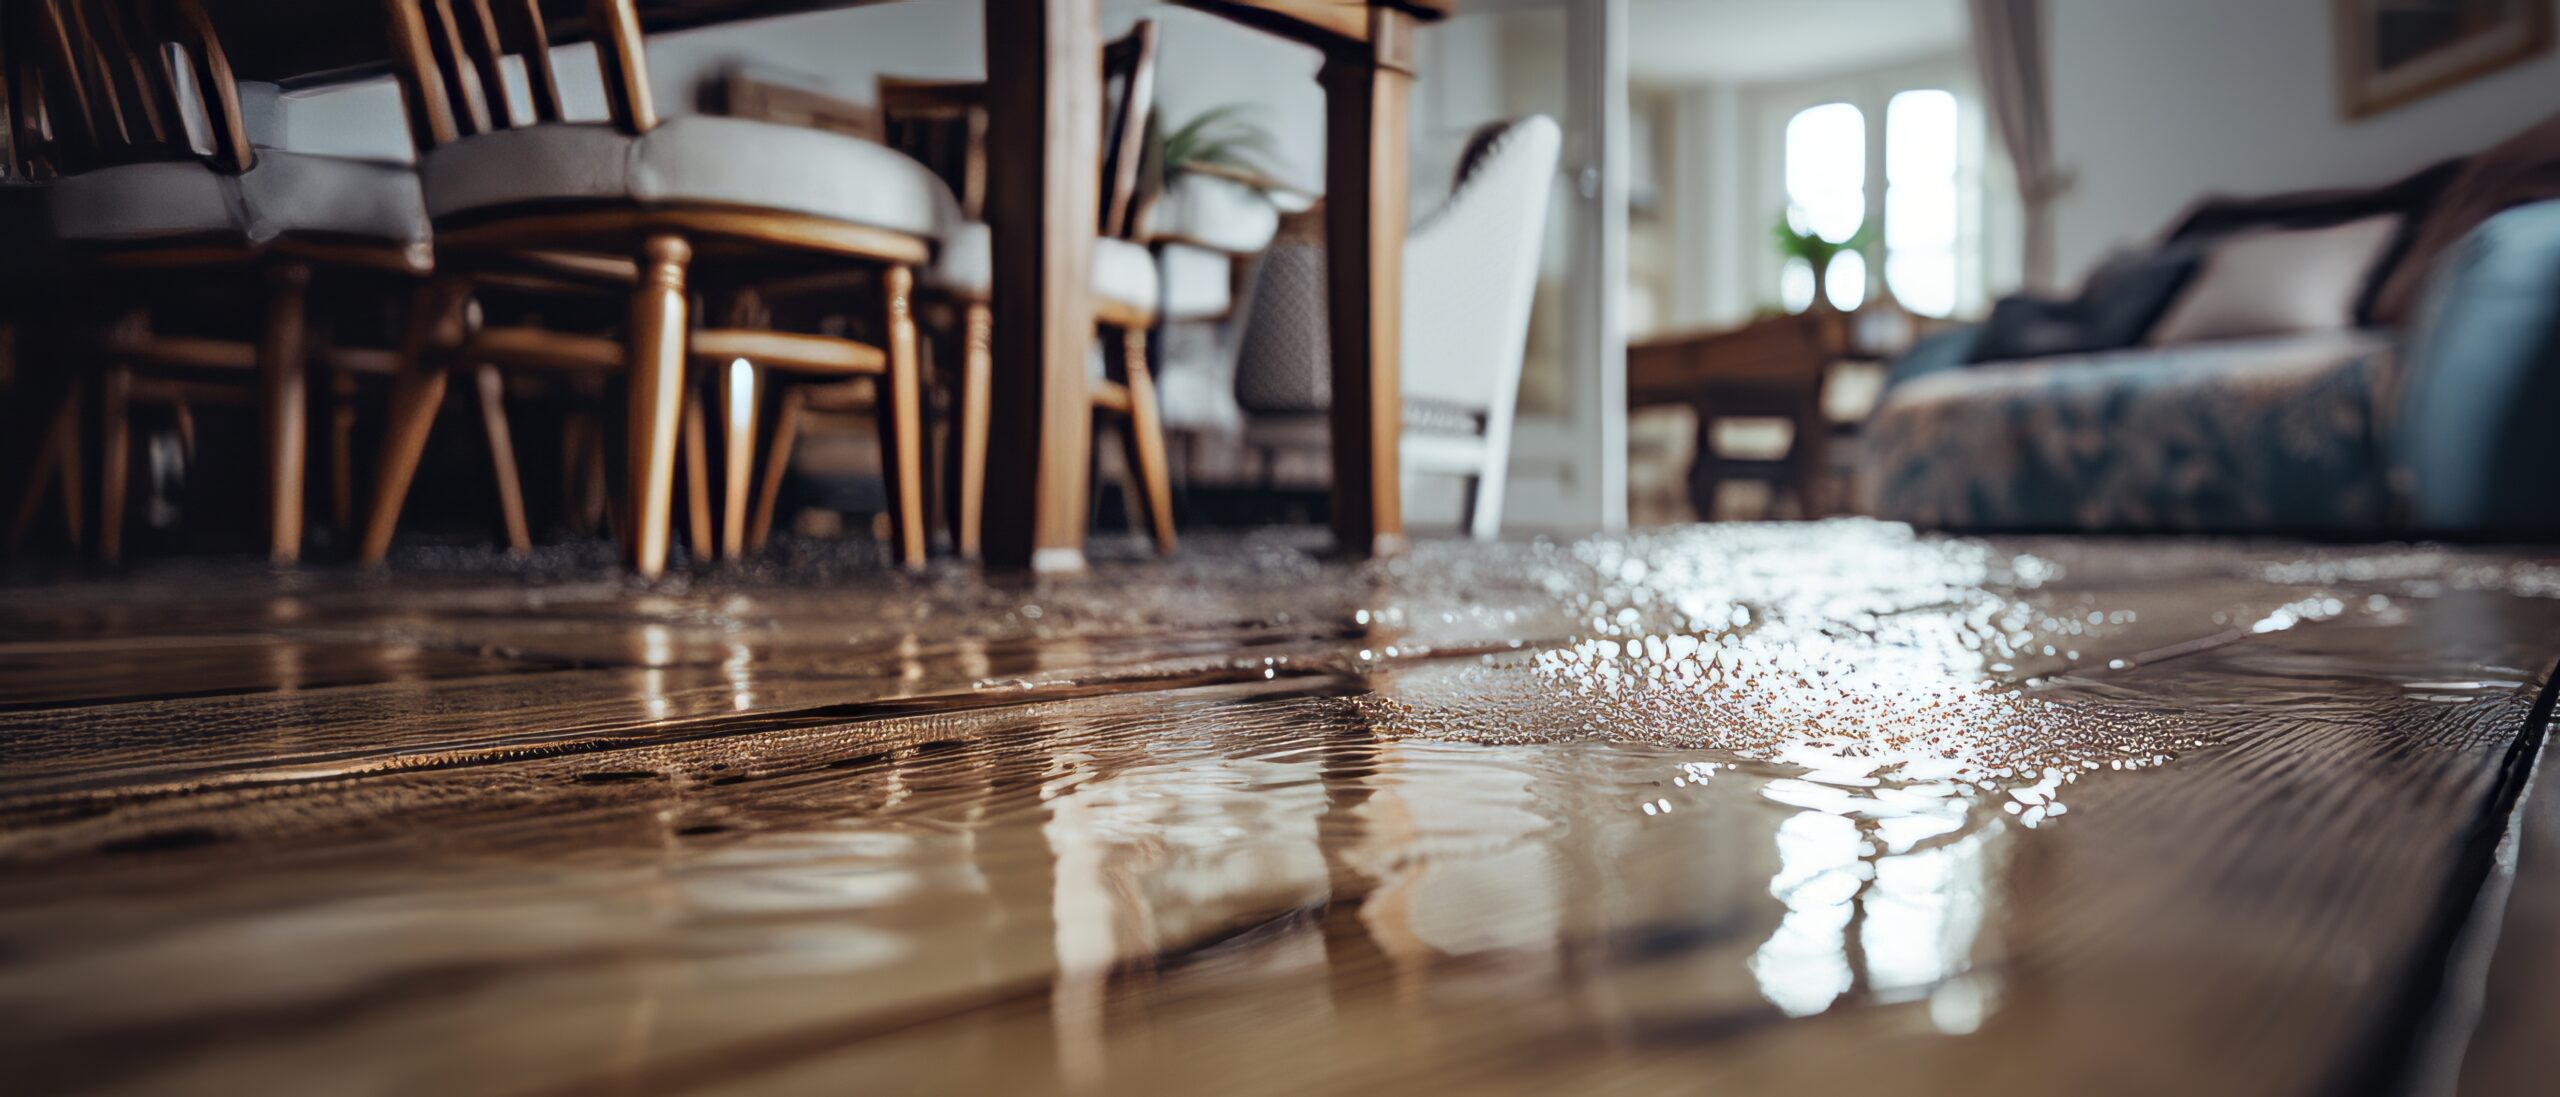 Identifying Water Damage and Our Restoration Process